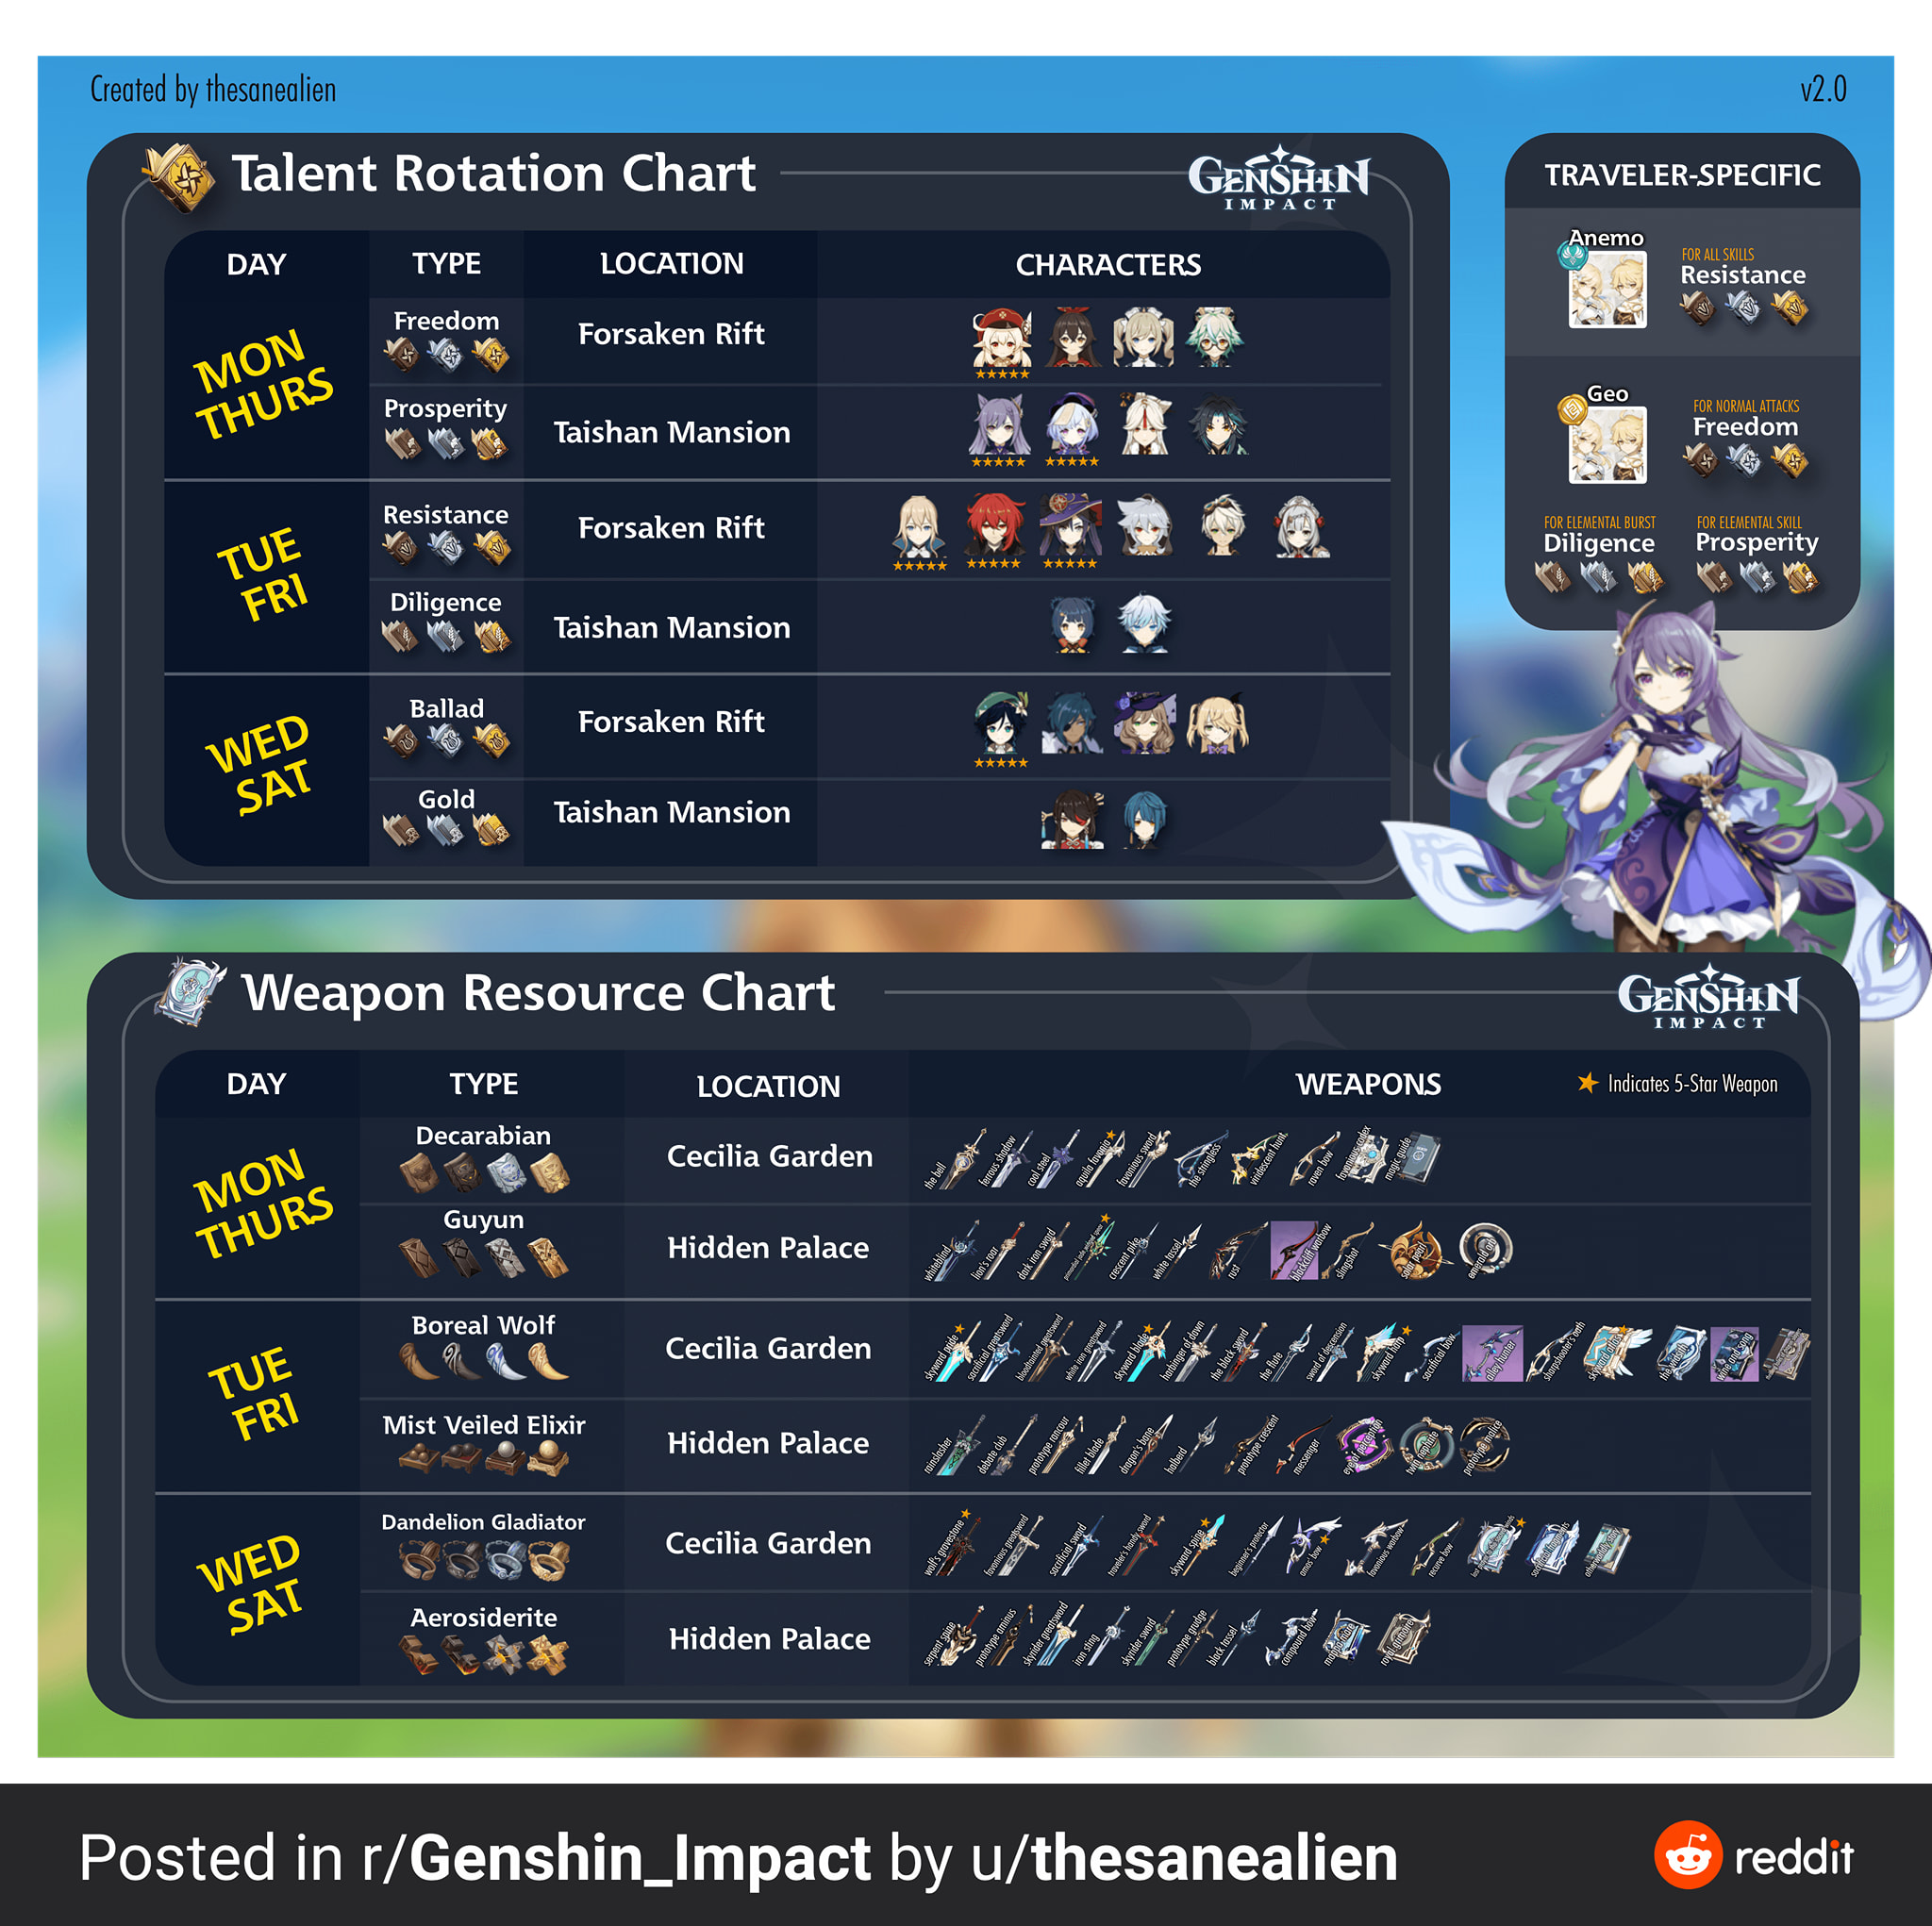 genshin impact apk for android